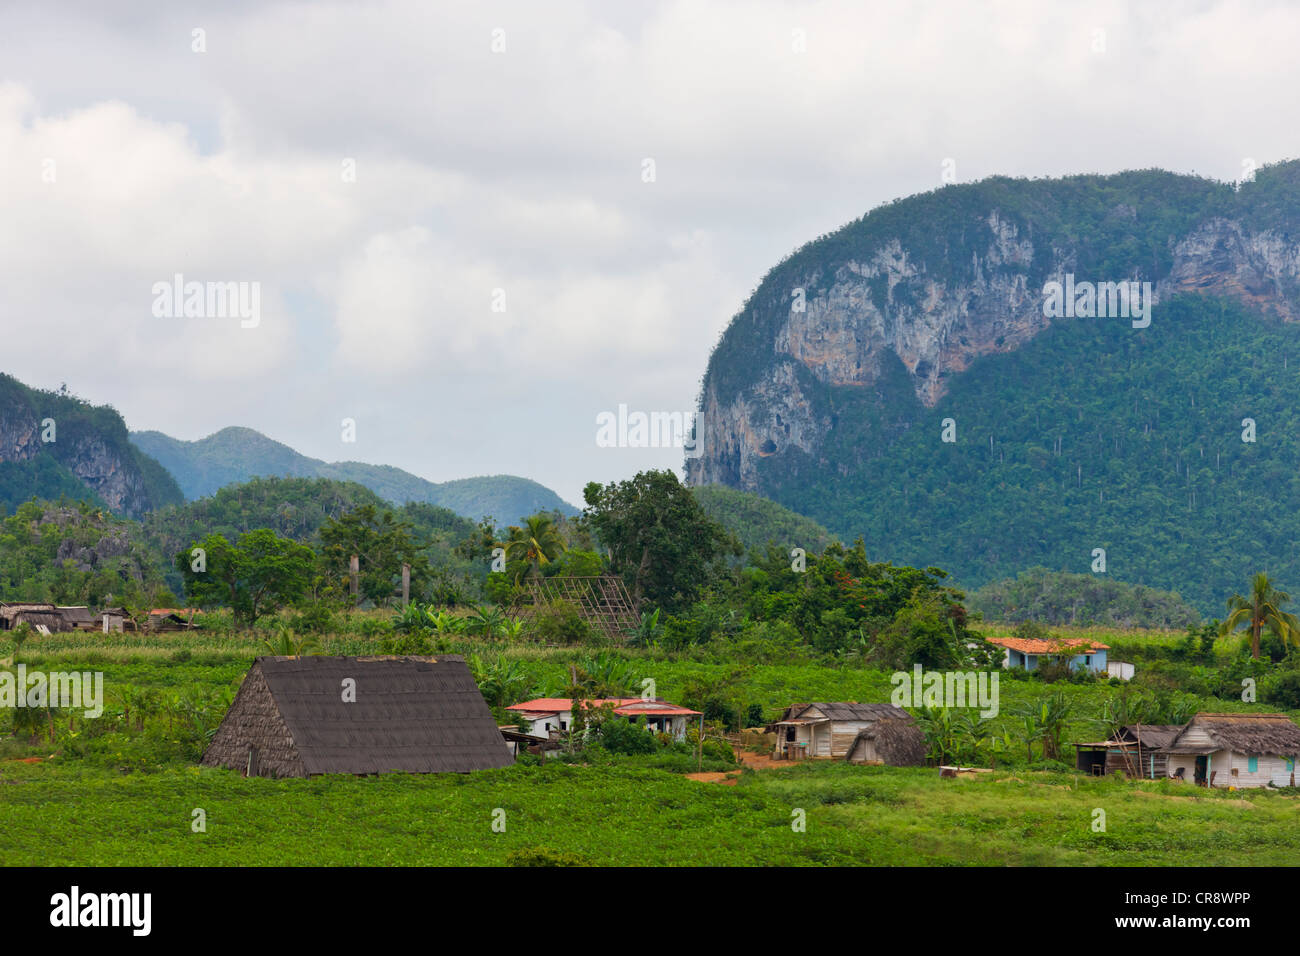 Limestone hill, farming land and tobacco drying house in Vinales valley, UNESCO World Heritage site, Cuba Stock Photo